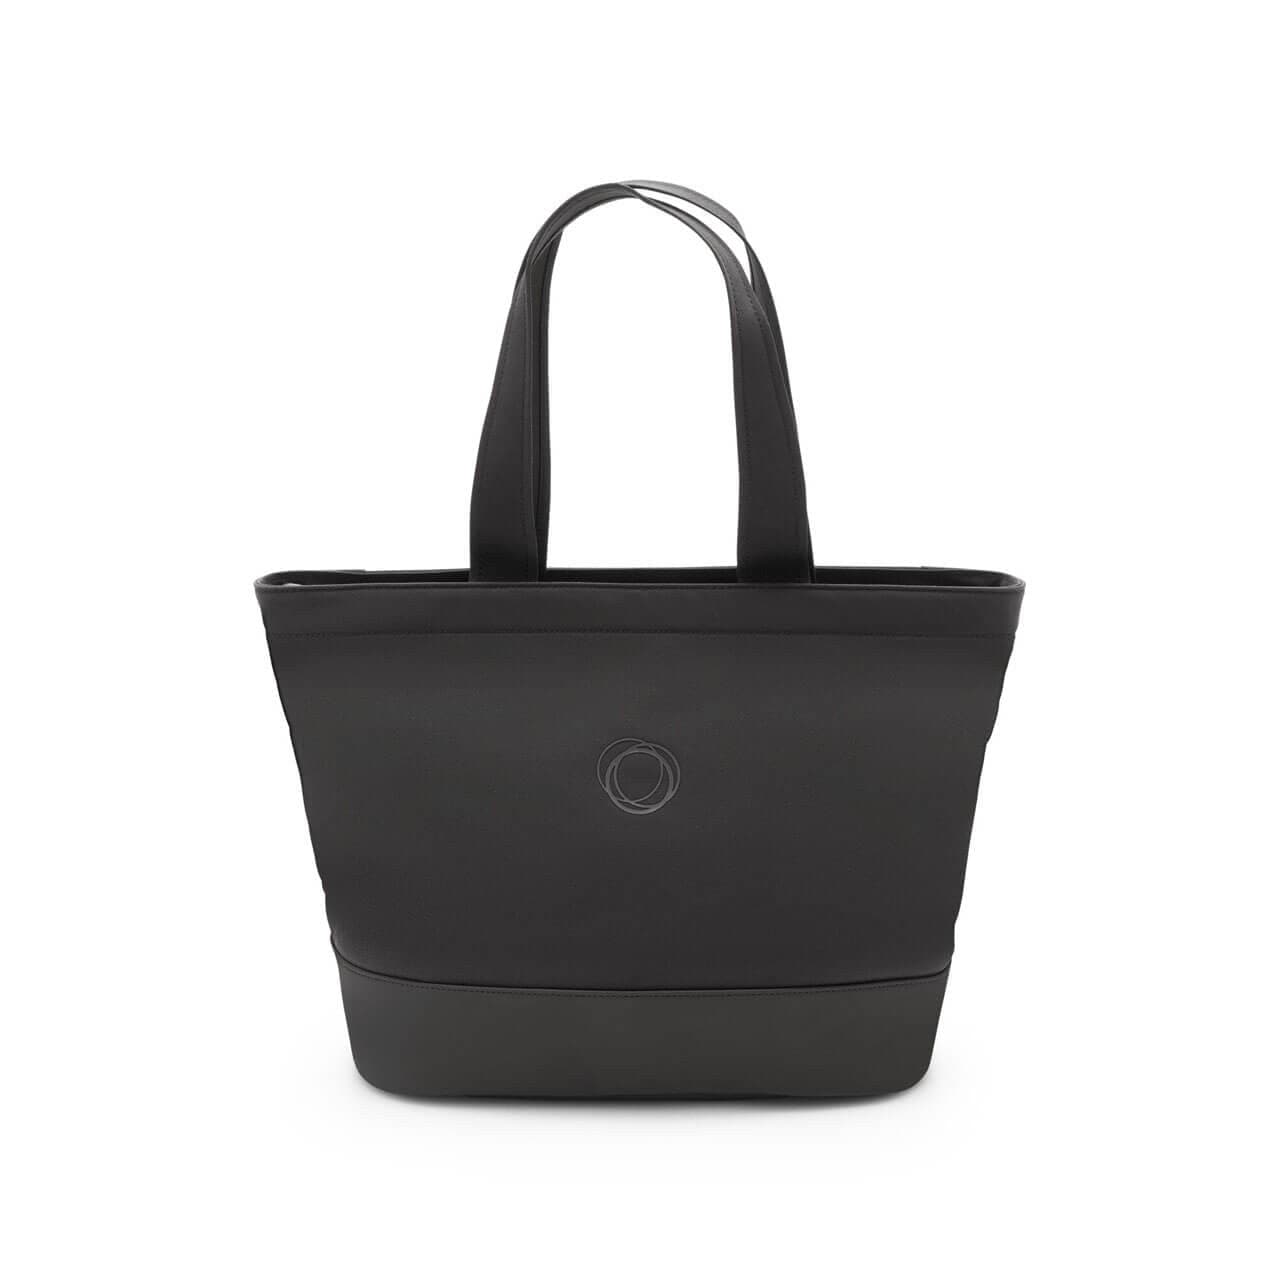 Bugaboo Changing Bag - Midnight Black - For Your Little One